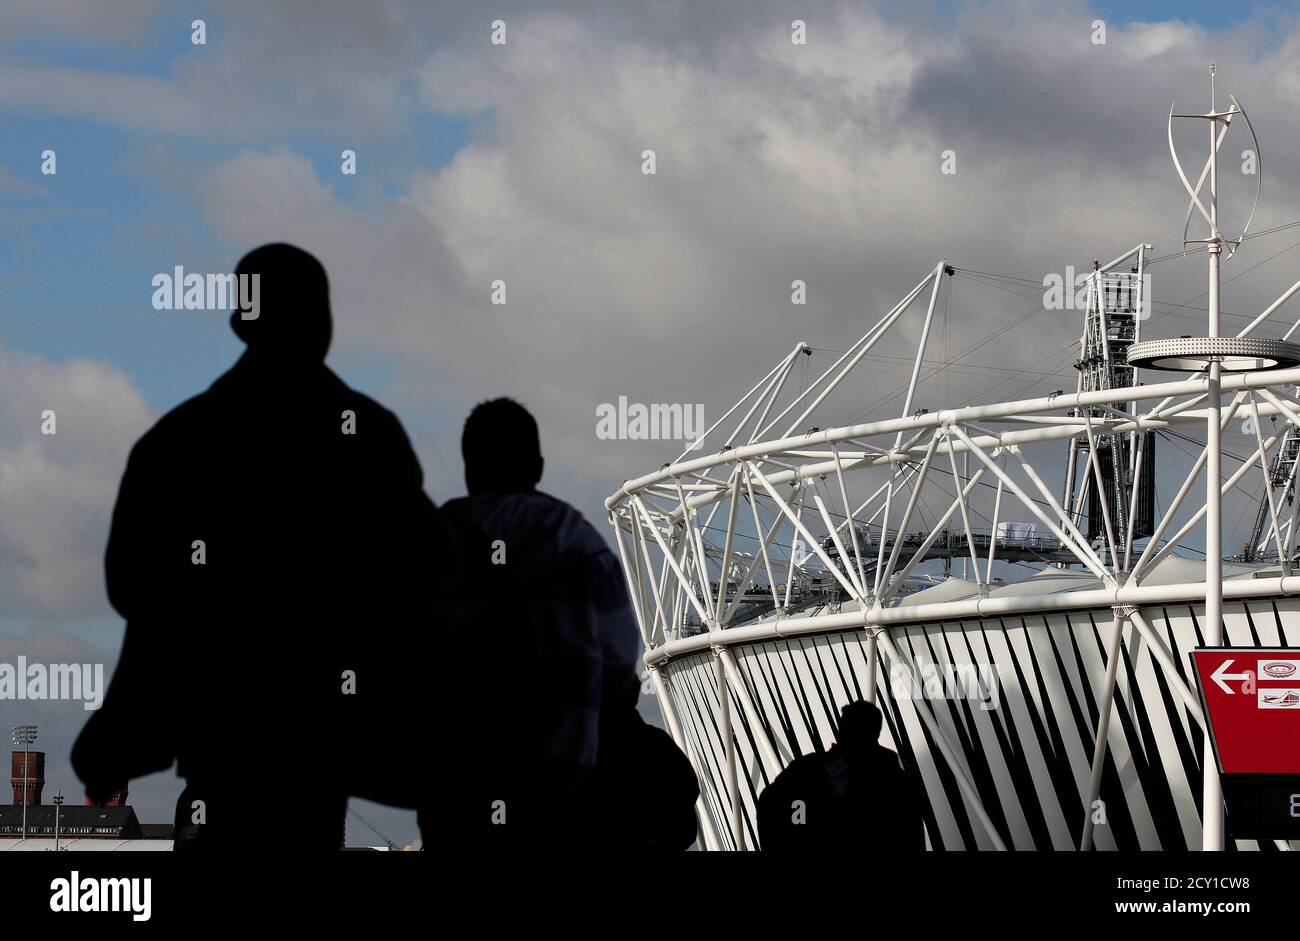 Workers and visitors walk towards the Olympic Stadium in Olympic Park, Stratford, east London, July 19, 2012. The 2012 London Olympic Games will begin in just over a week.  REUTERS/Andrew Winning (BRITAIN - Tags: SPORT OLYMPICS) Stock Photo